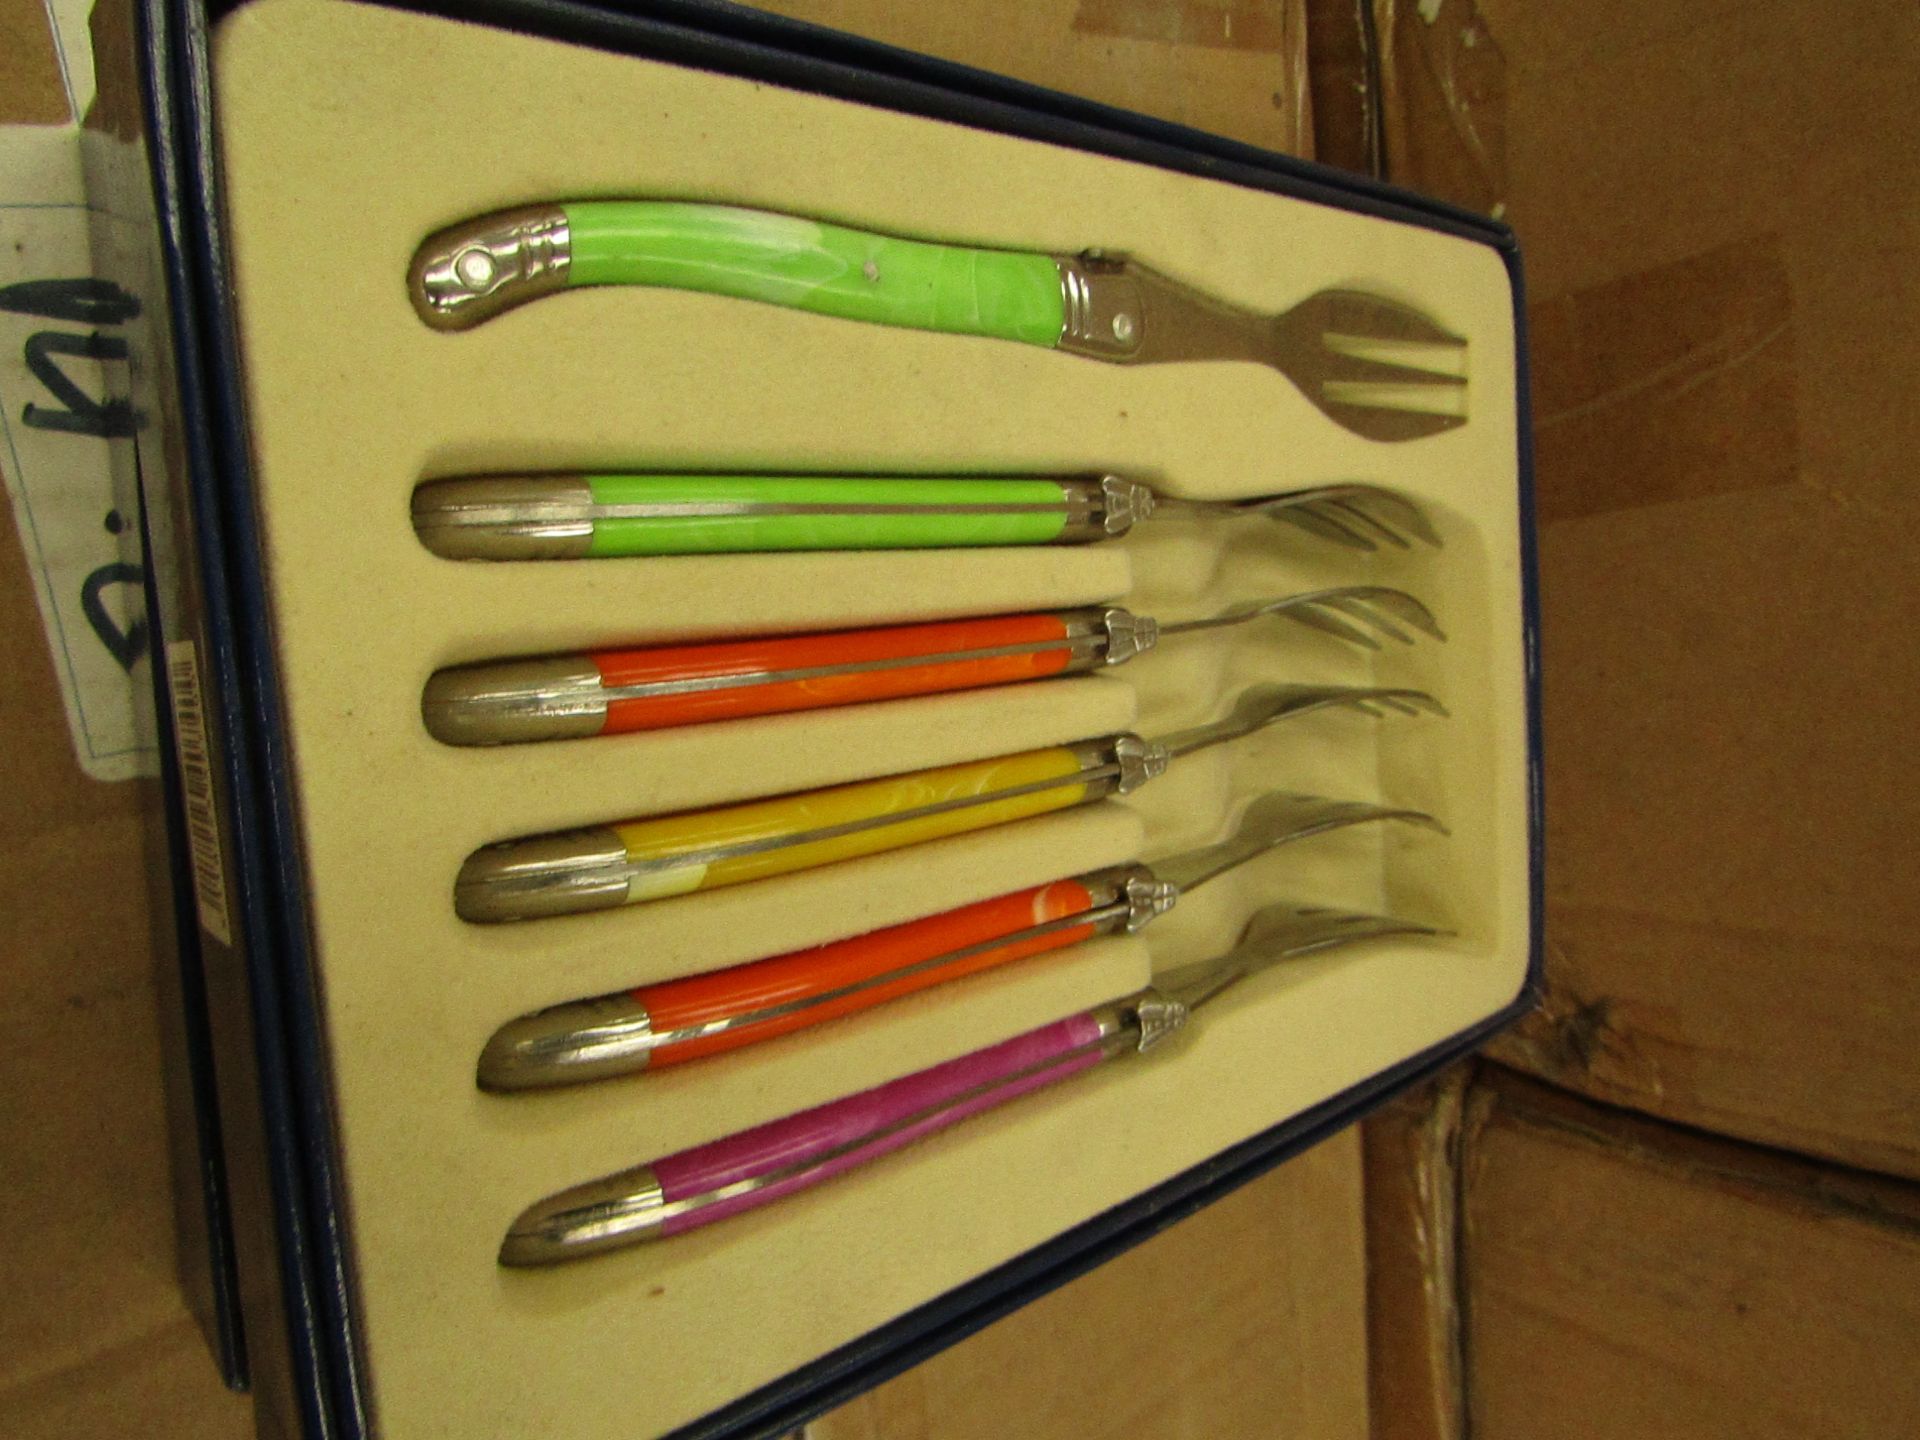 10x Laguiole - Cake Forks (6 Forks Per Box) Blue & Green - Unused & Boxed.